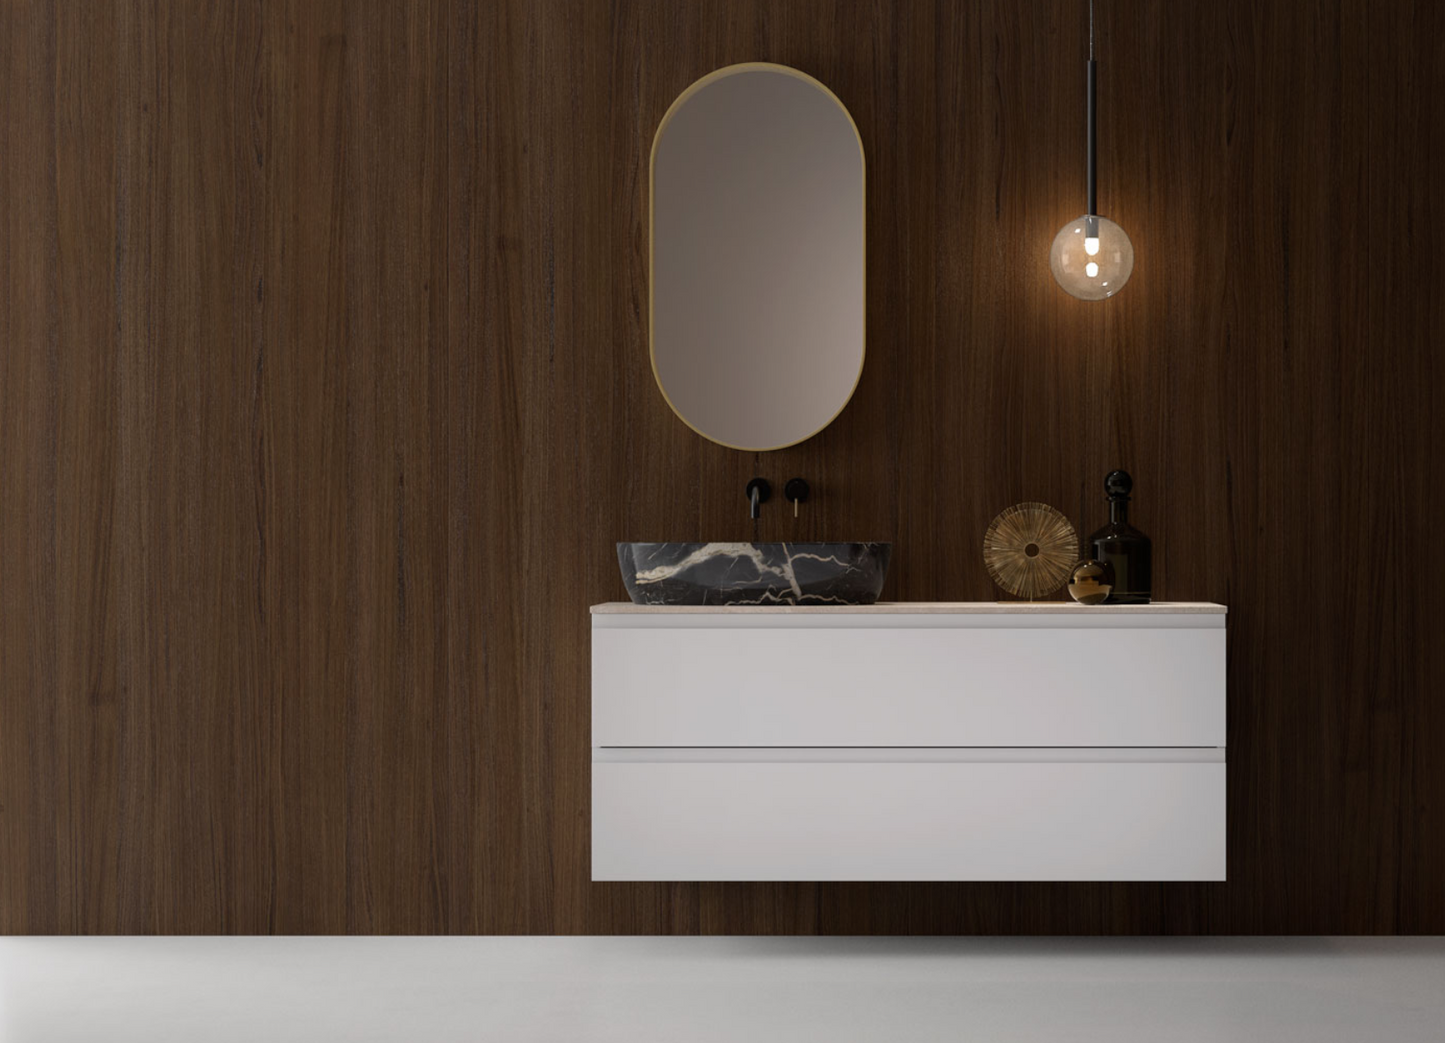 Oval Box Mirror by Maderó Atelier 